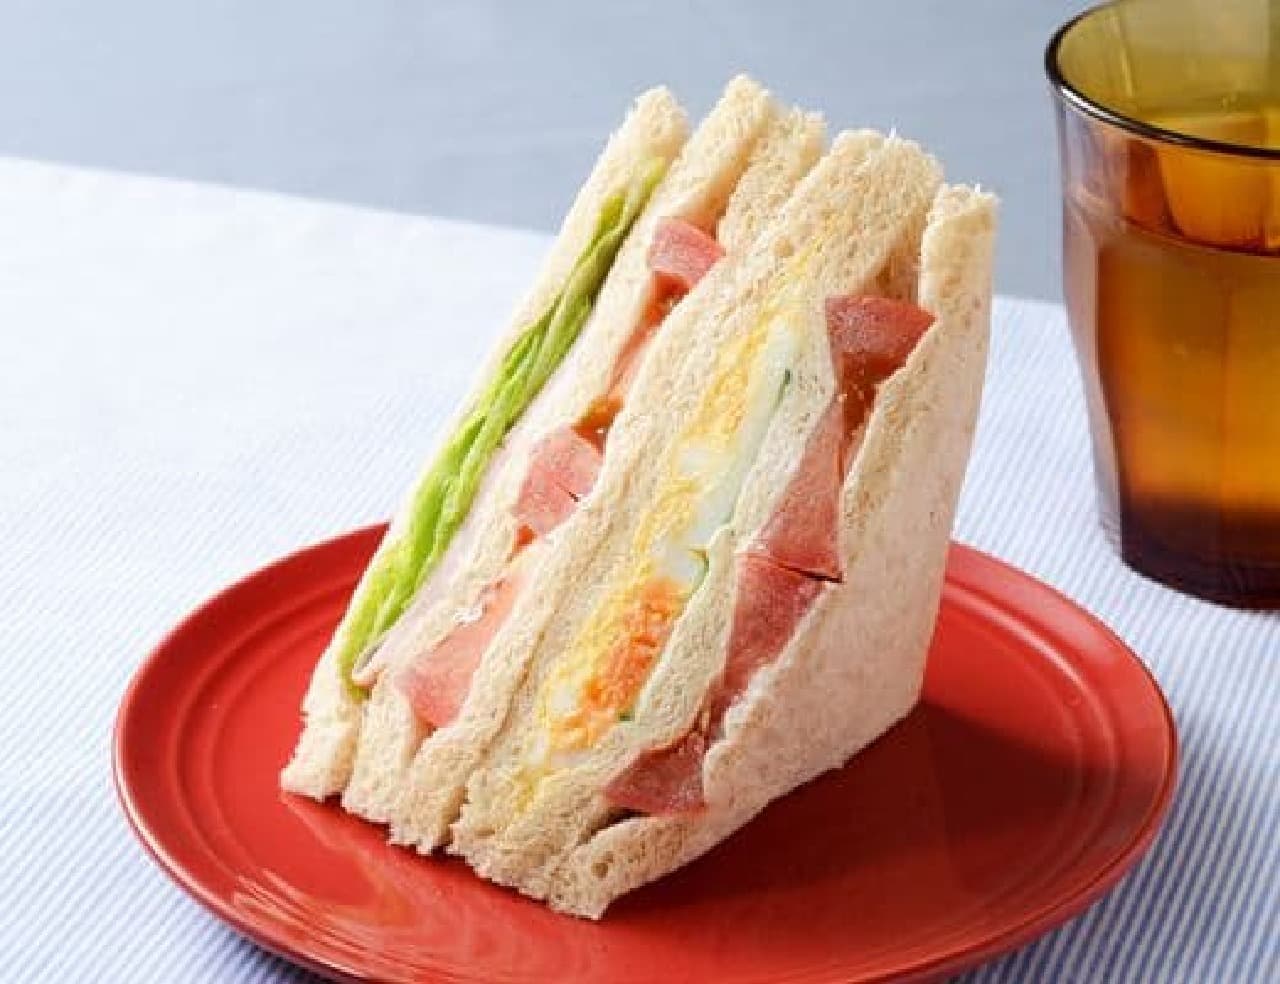 Lawson "Tomato and vegetable sandwich (increased amount)"